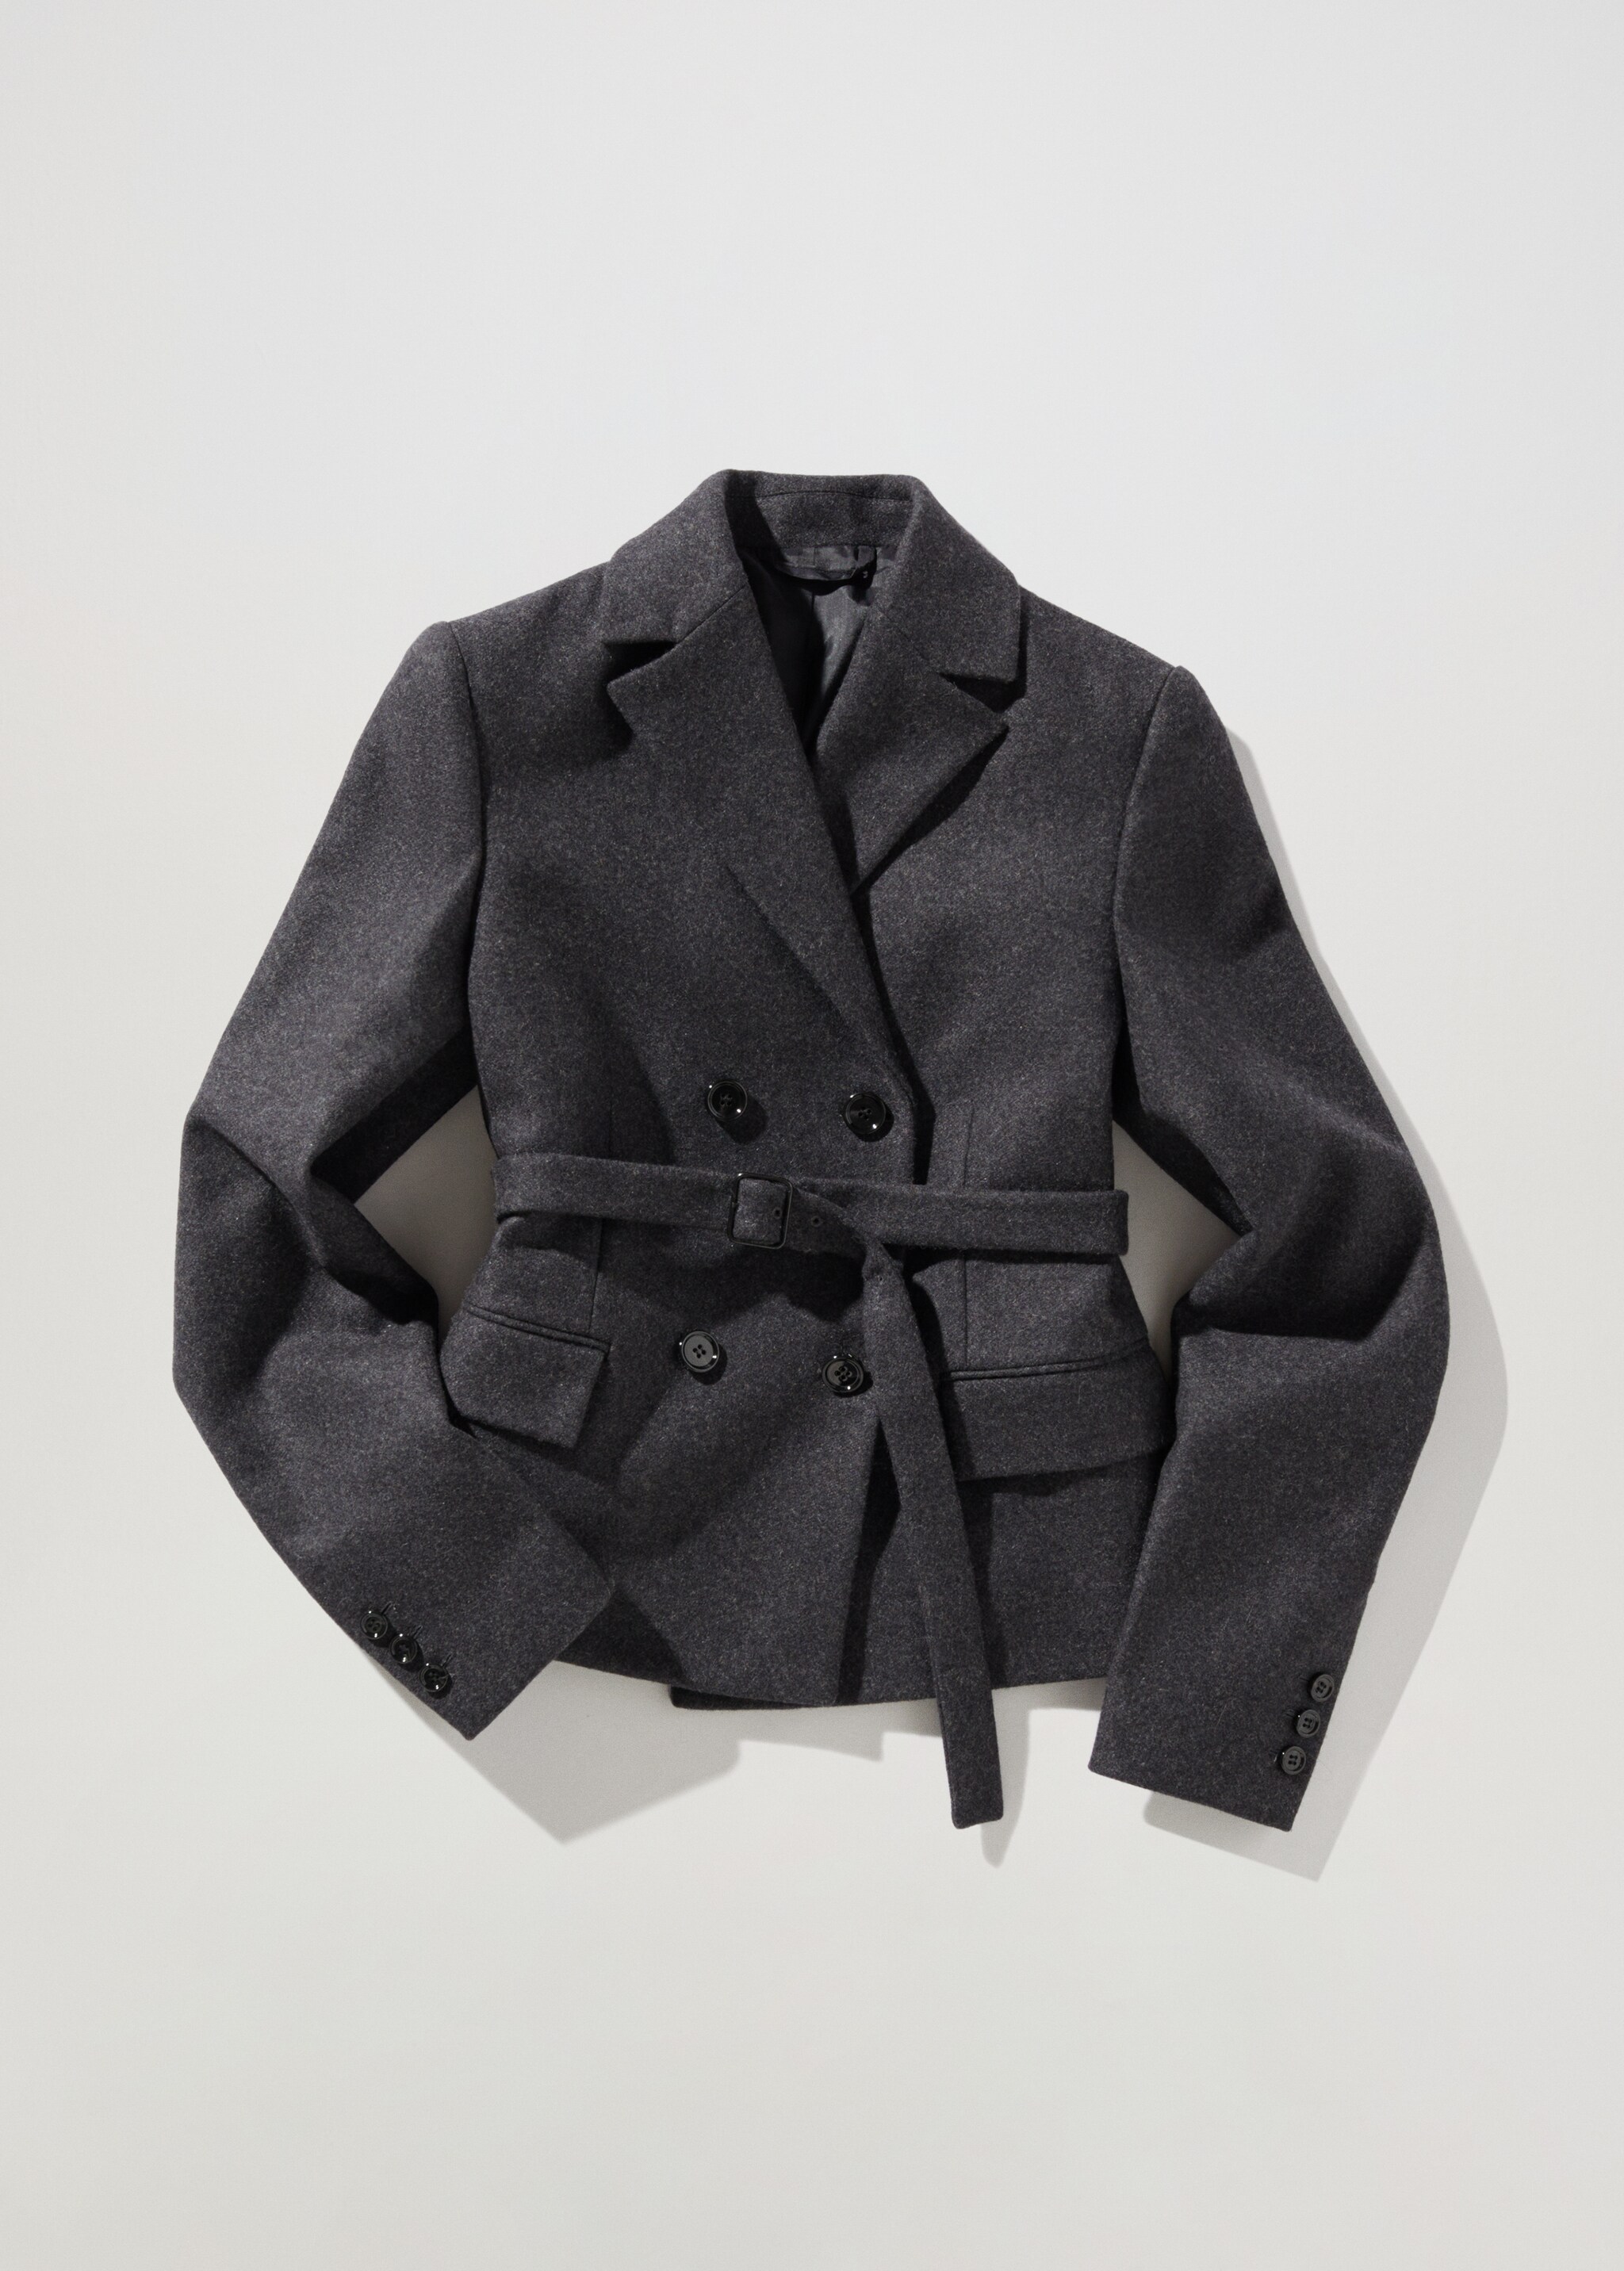 Wool jacket with belt - Article without model